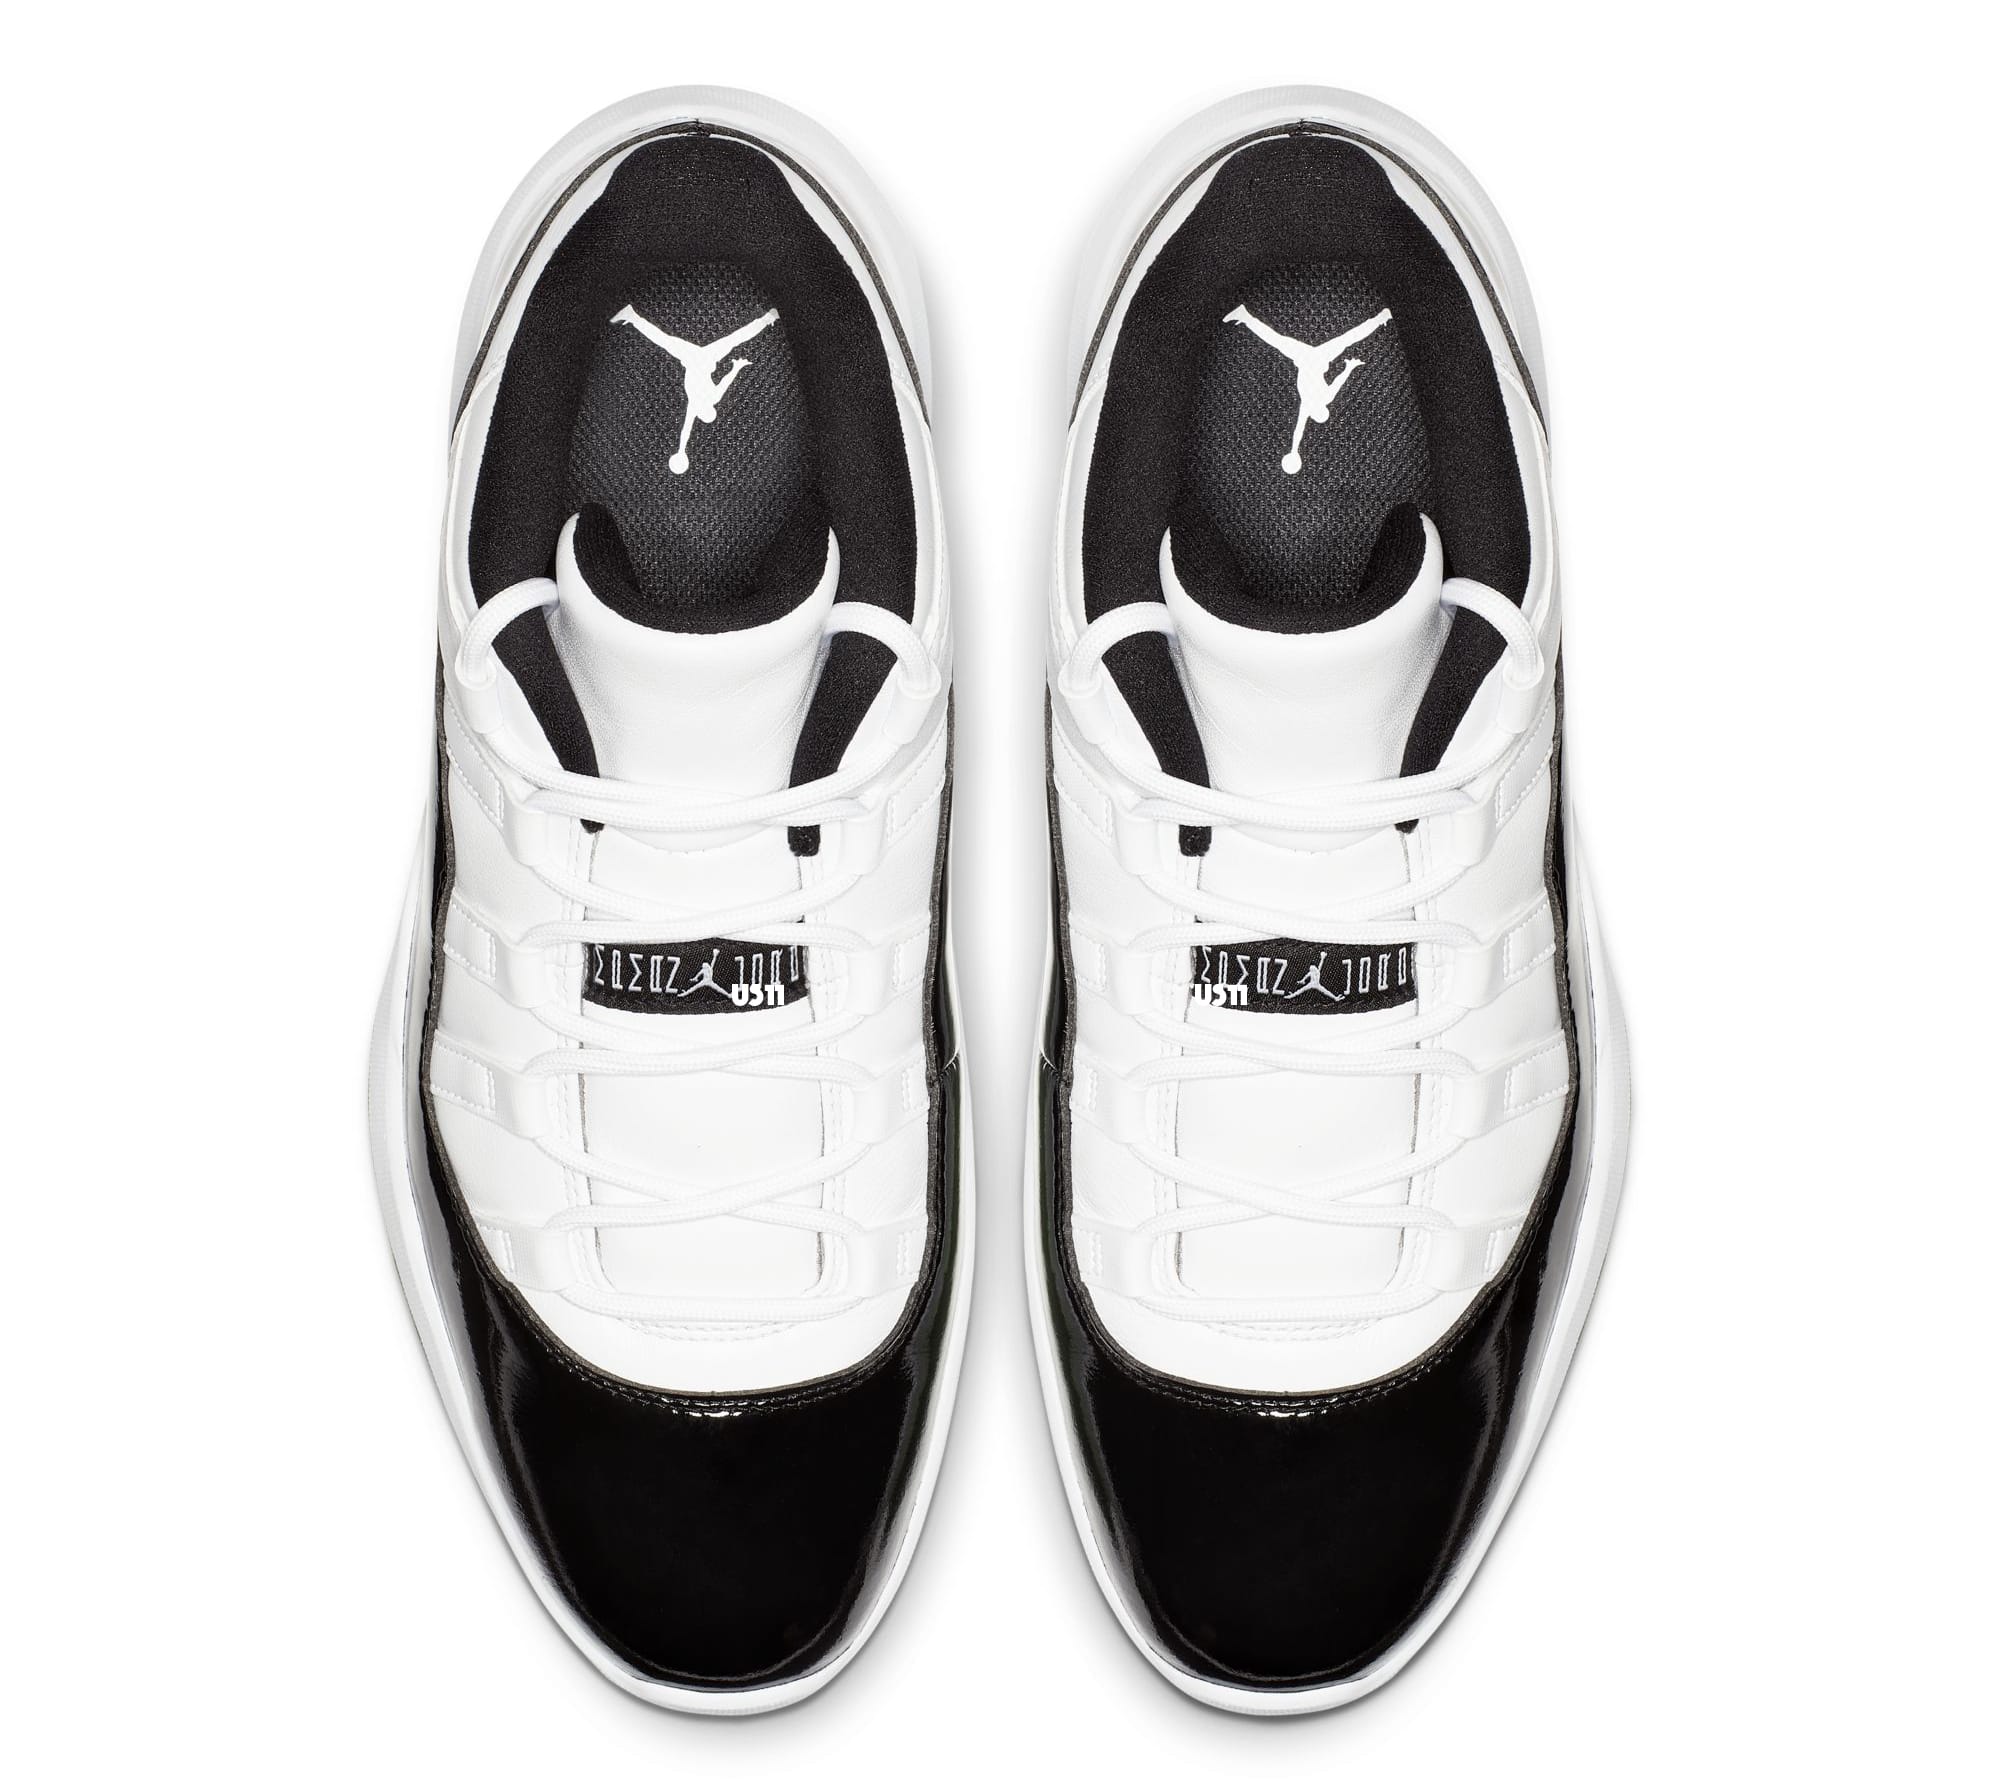 concord 11 golf shoes